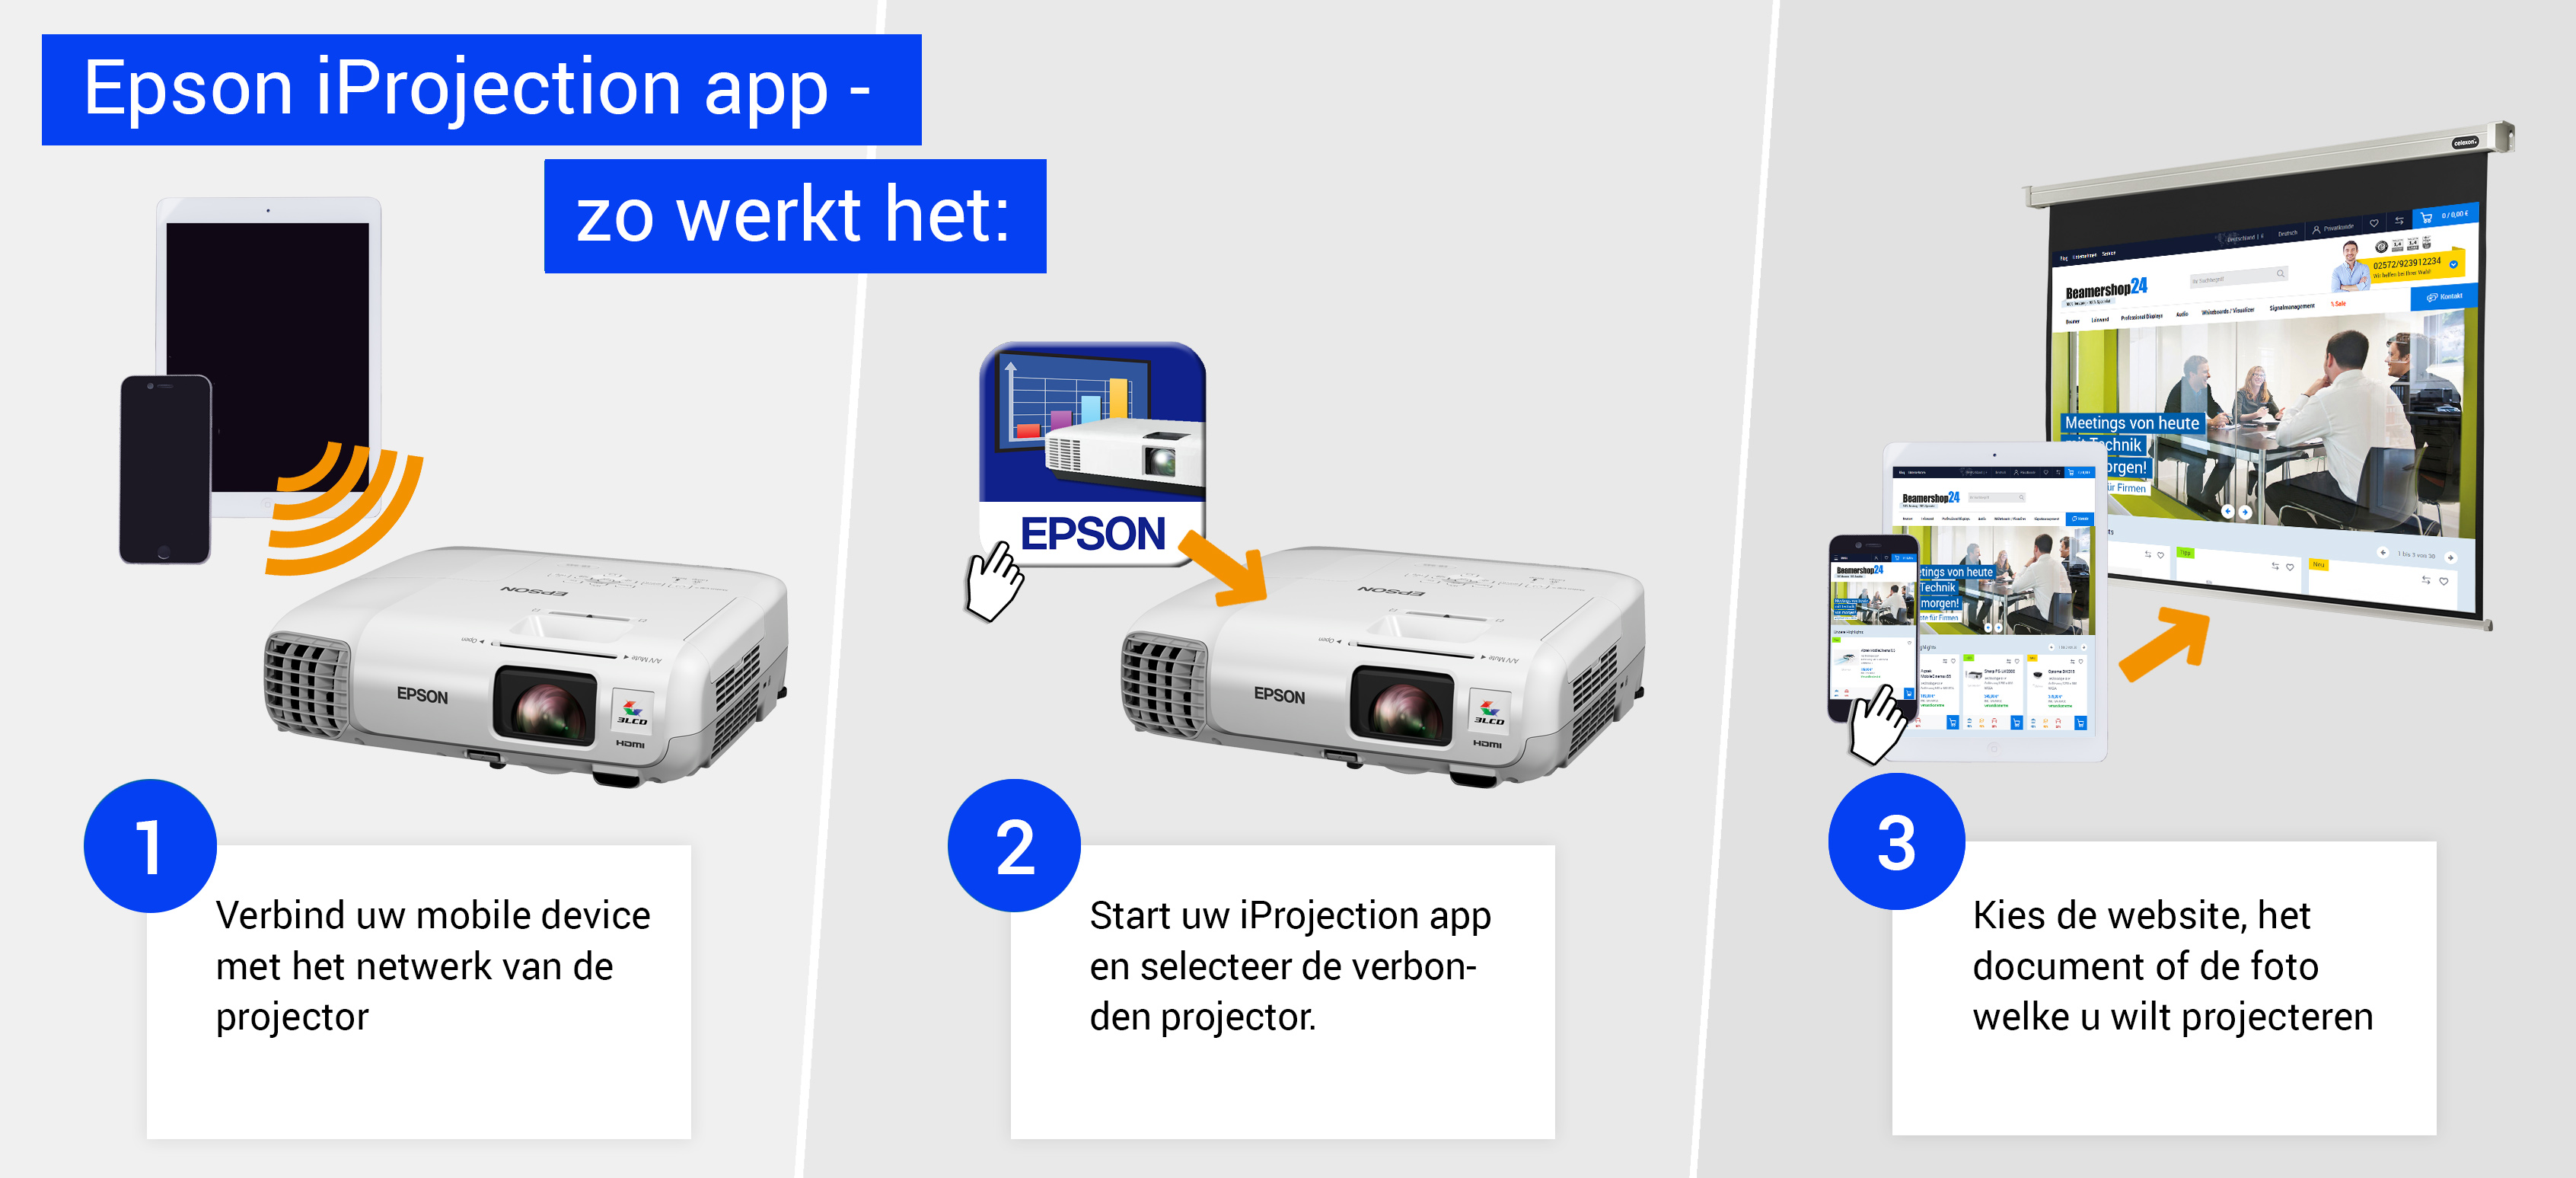 Funktionsweise der Epson iProjection App